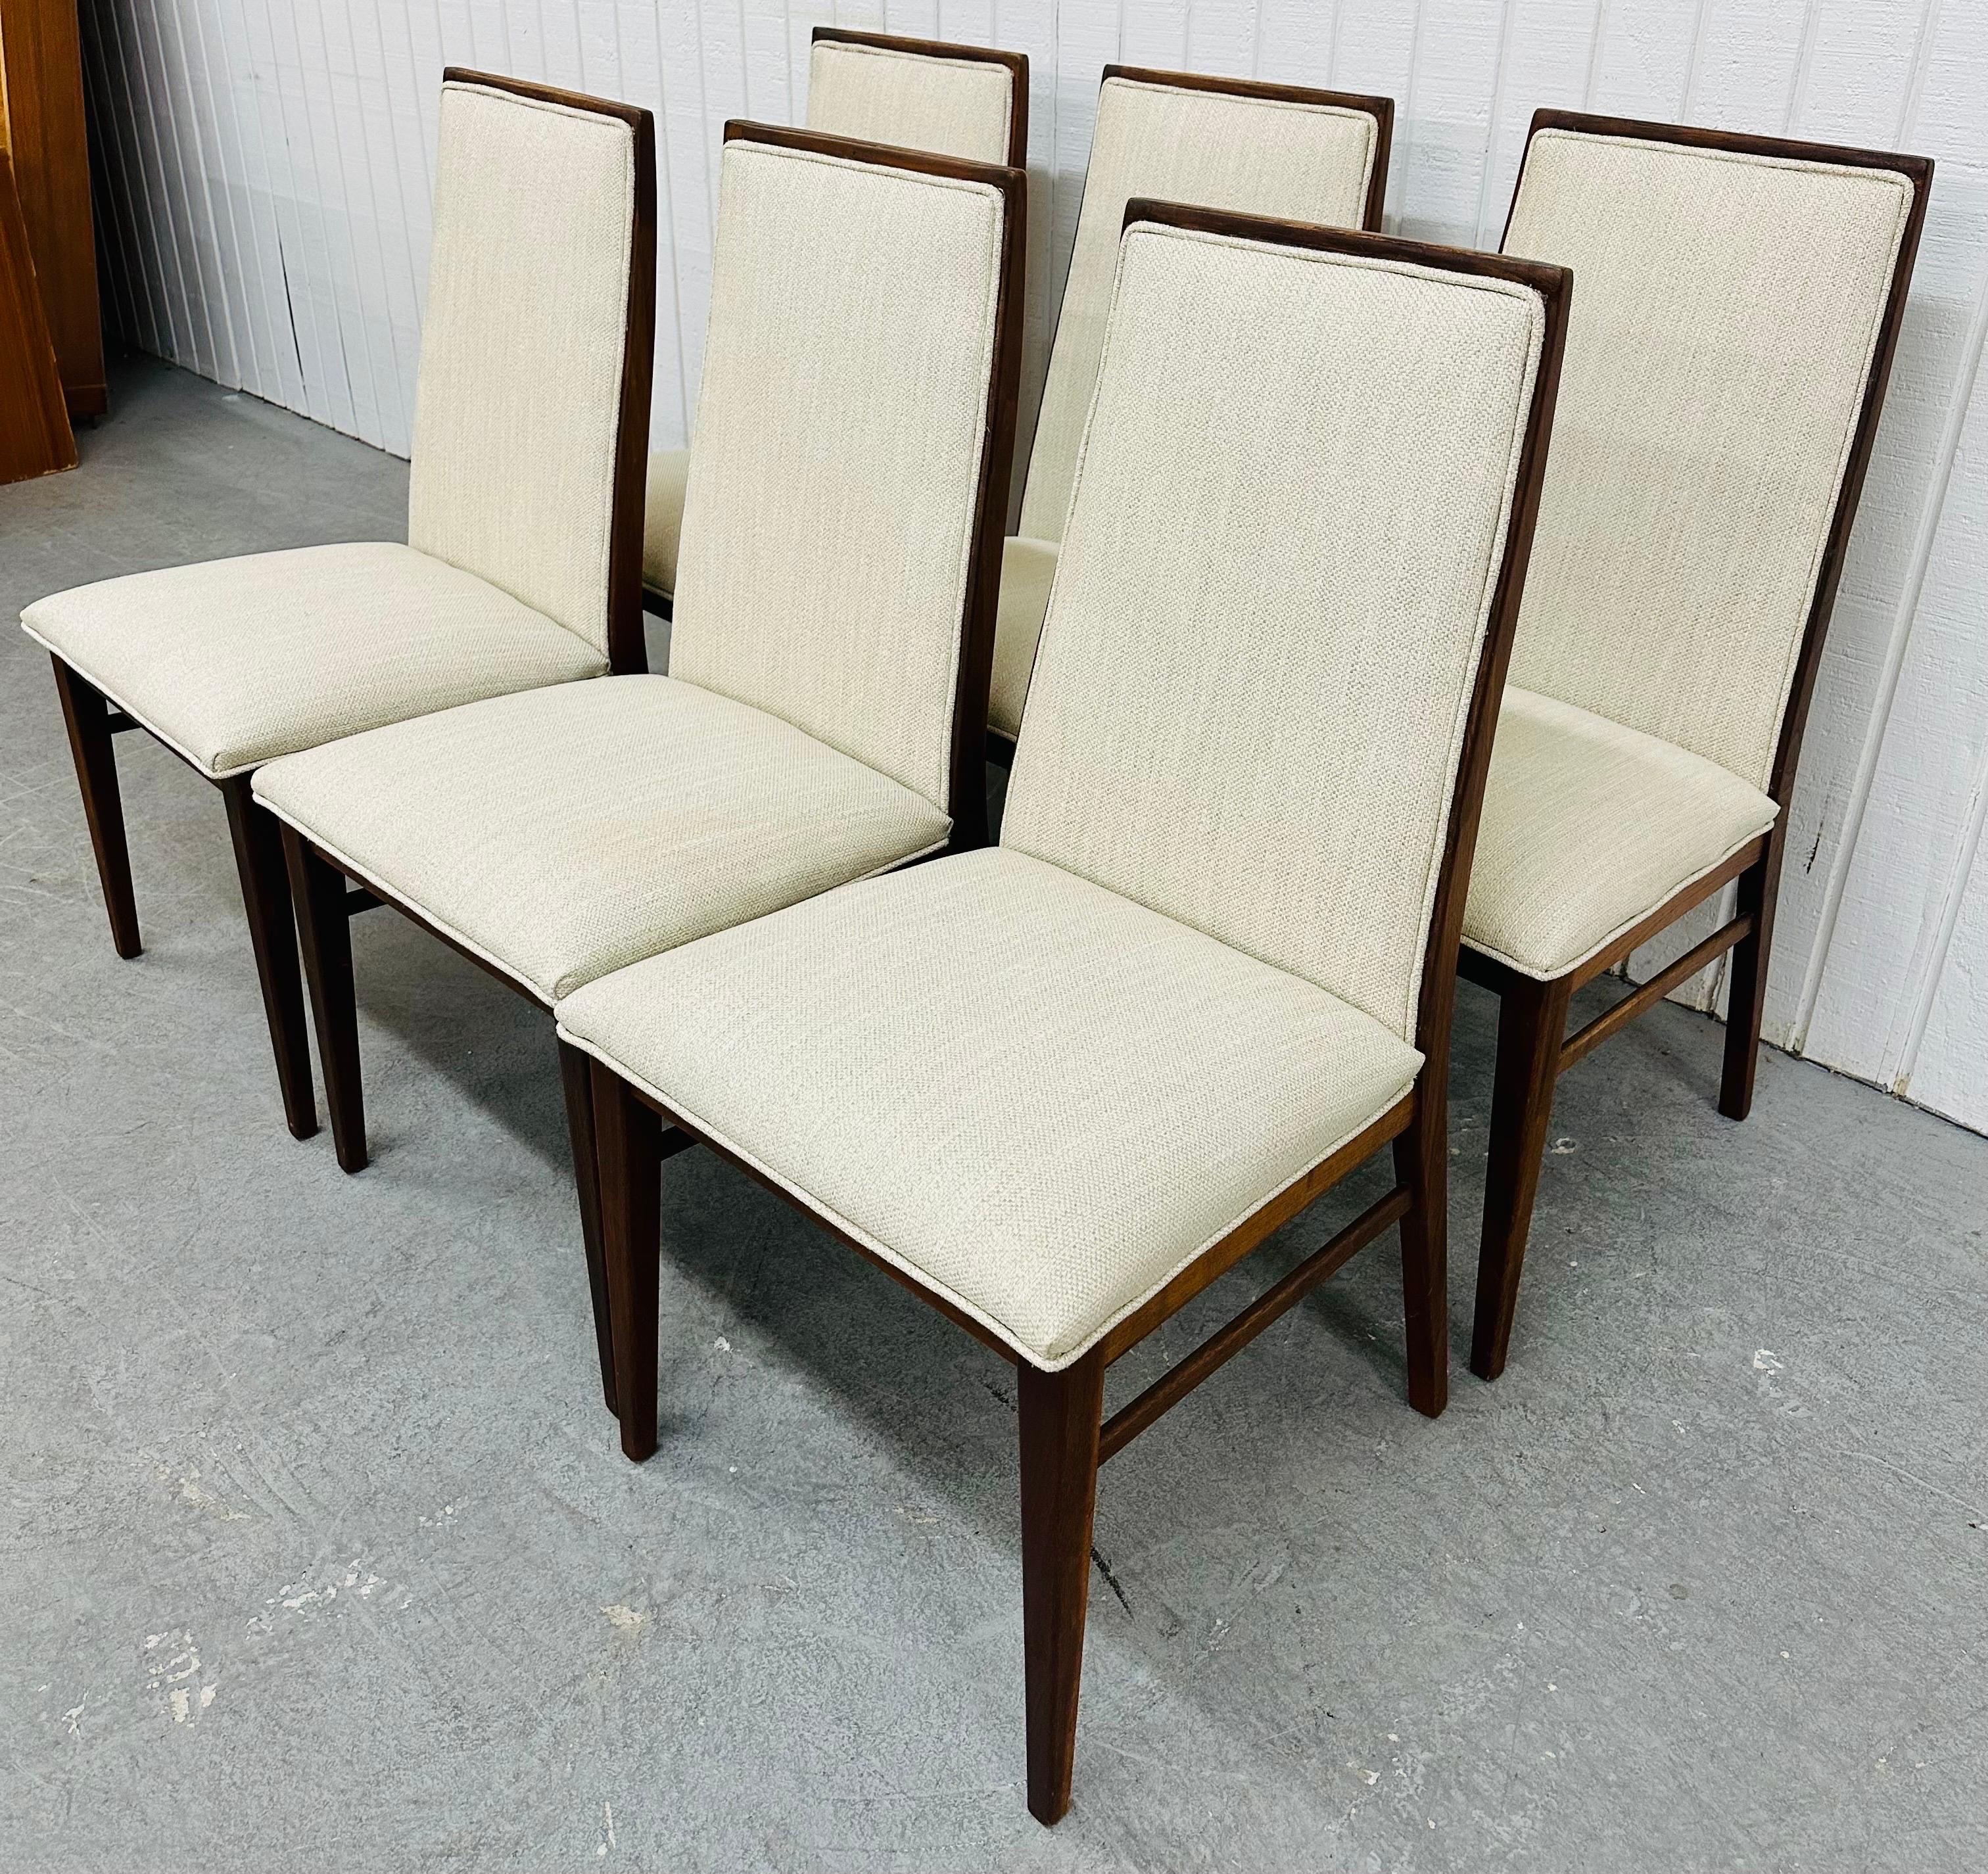 This listing is for a set of six Mid-Century Modern Dillingham Walnut Dining Chairs. Featuring a straight line design, six straight chairs, newly upholstered back rests and seats, and a beautiful walnut finish. This is an exceptional combination of